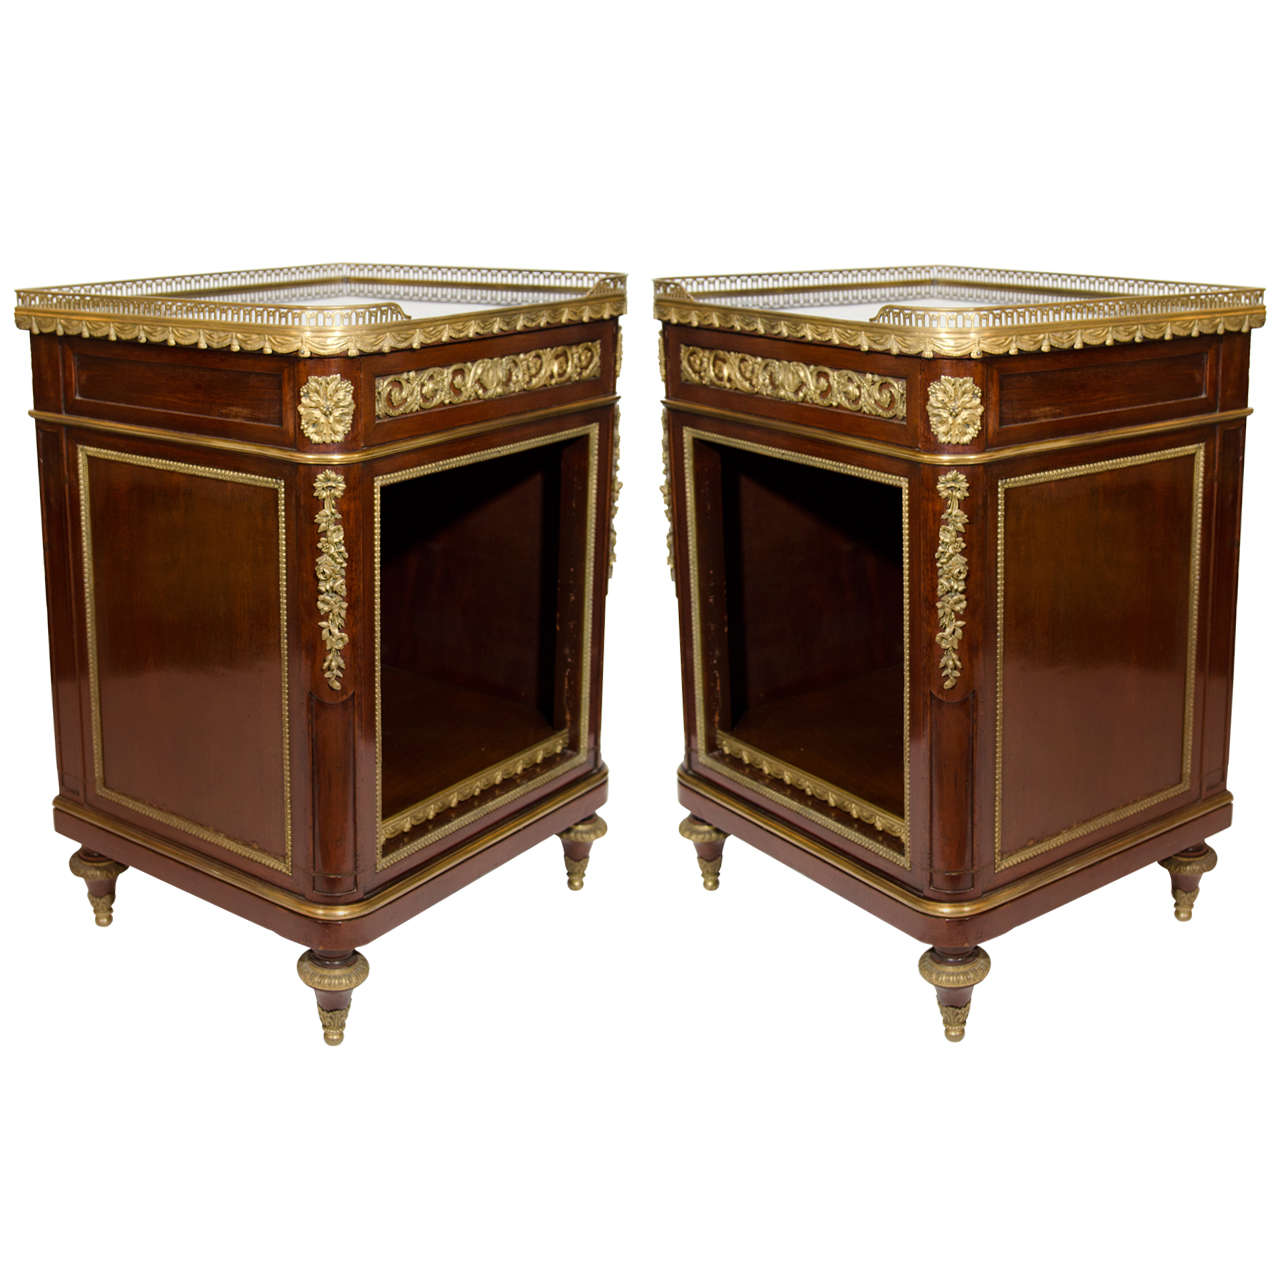 Pair of Antique French Louis XVI Style Gilt Bronze Mounted Side Tables